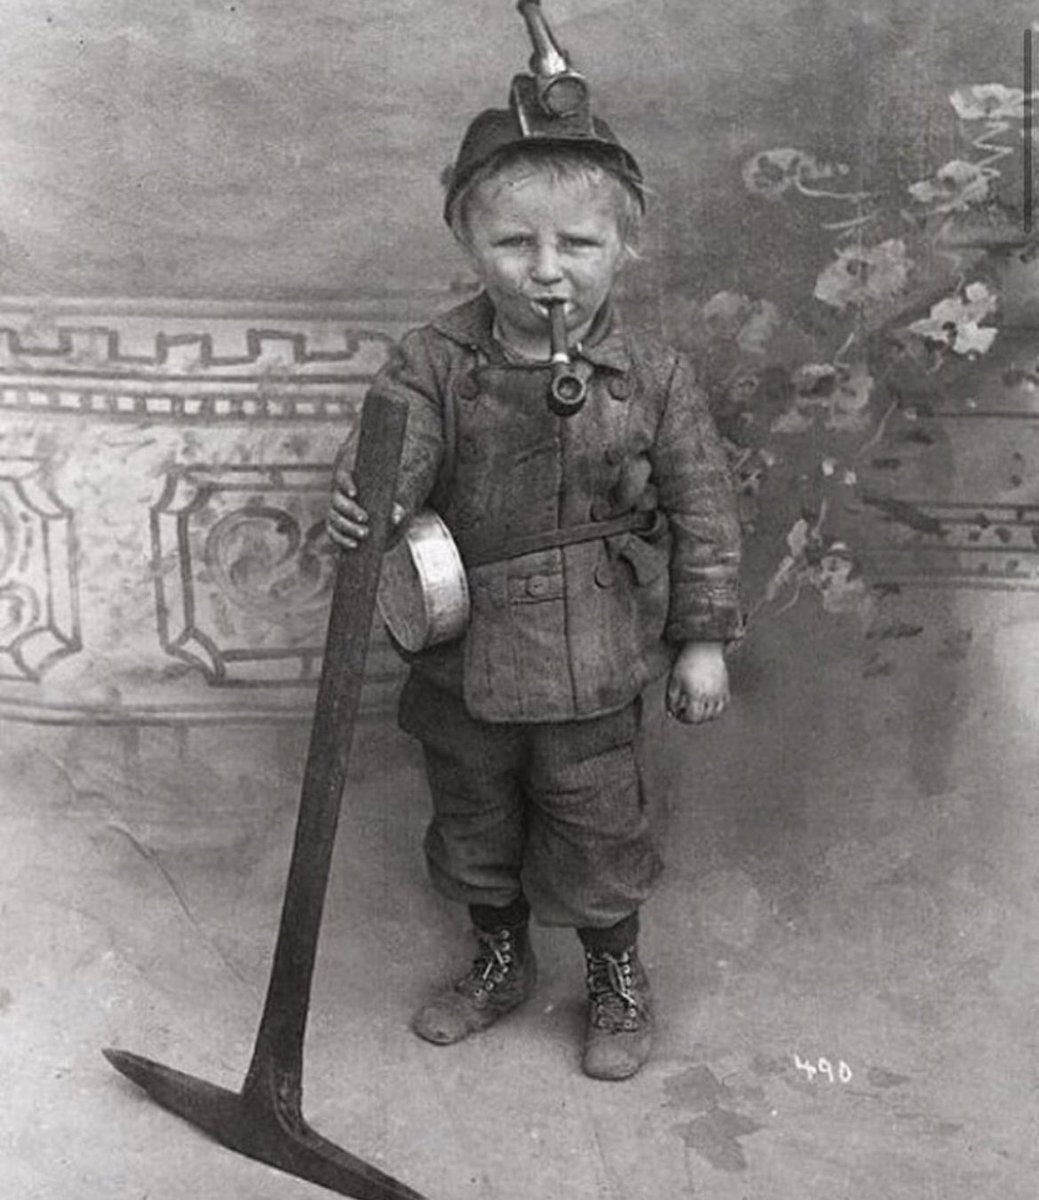 In the early 1900s, in Utah or Colorado, USA, a young miner boy toiled in the coal mines. Thousands of boys under the age of 14 were employed in these dangerous underground tunnels. The process involved drilling, blasting, and digging coal. However, this hazardous occupation…